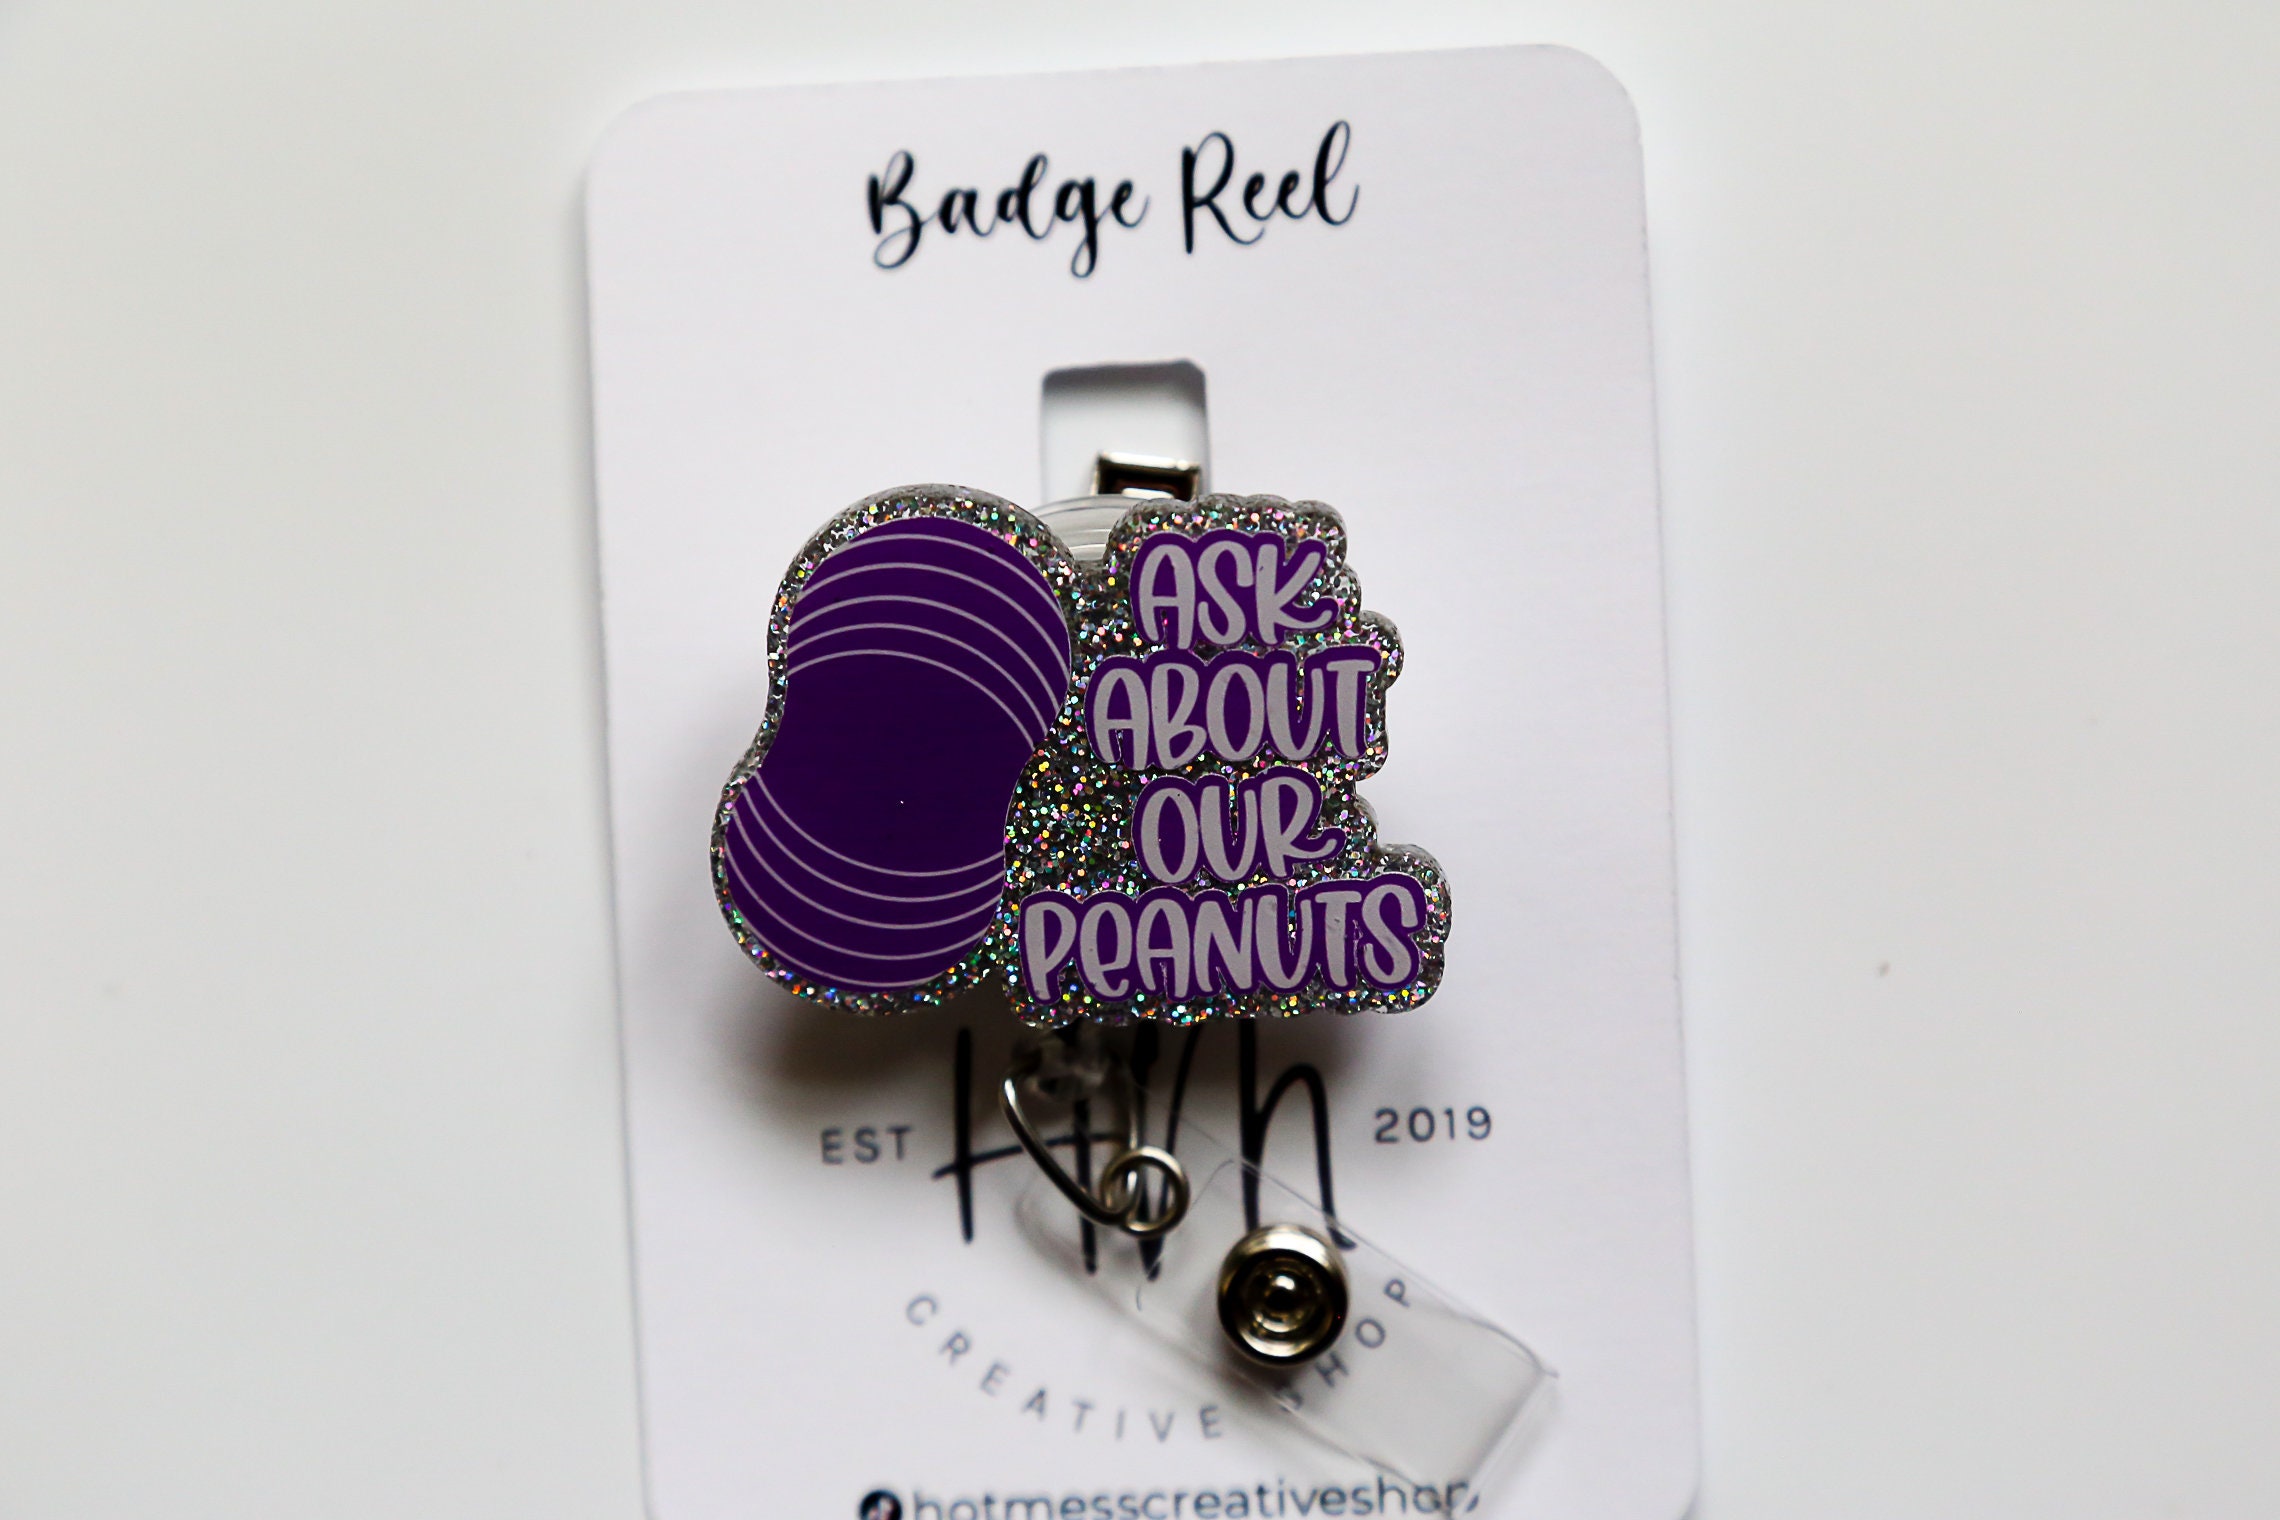 Ask Me About Our Peanuts ID Holder, Nurse ID Holder, Funny Badge